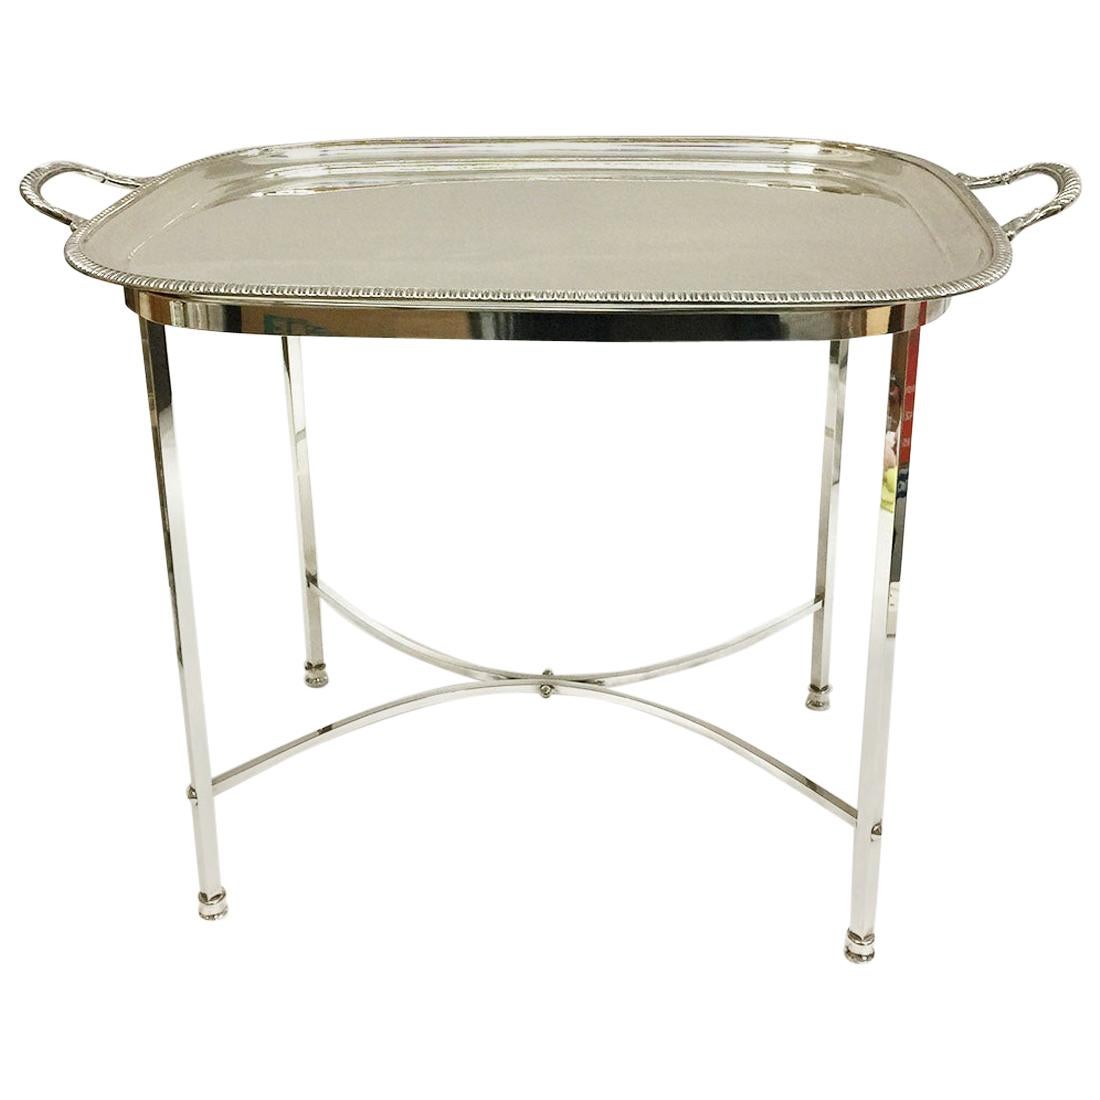 Harrison Brothers & Howson English Silver-Plated Tea Table For Sale